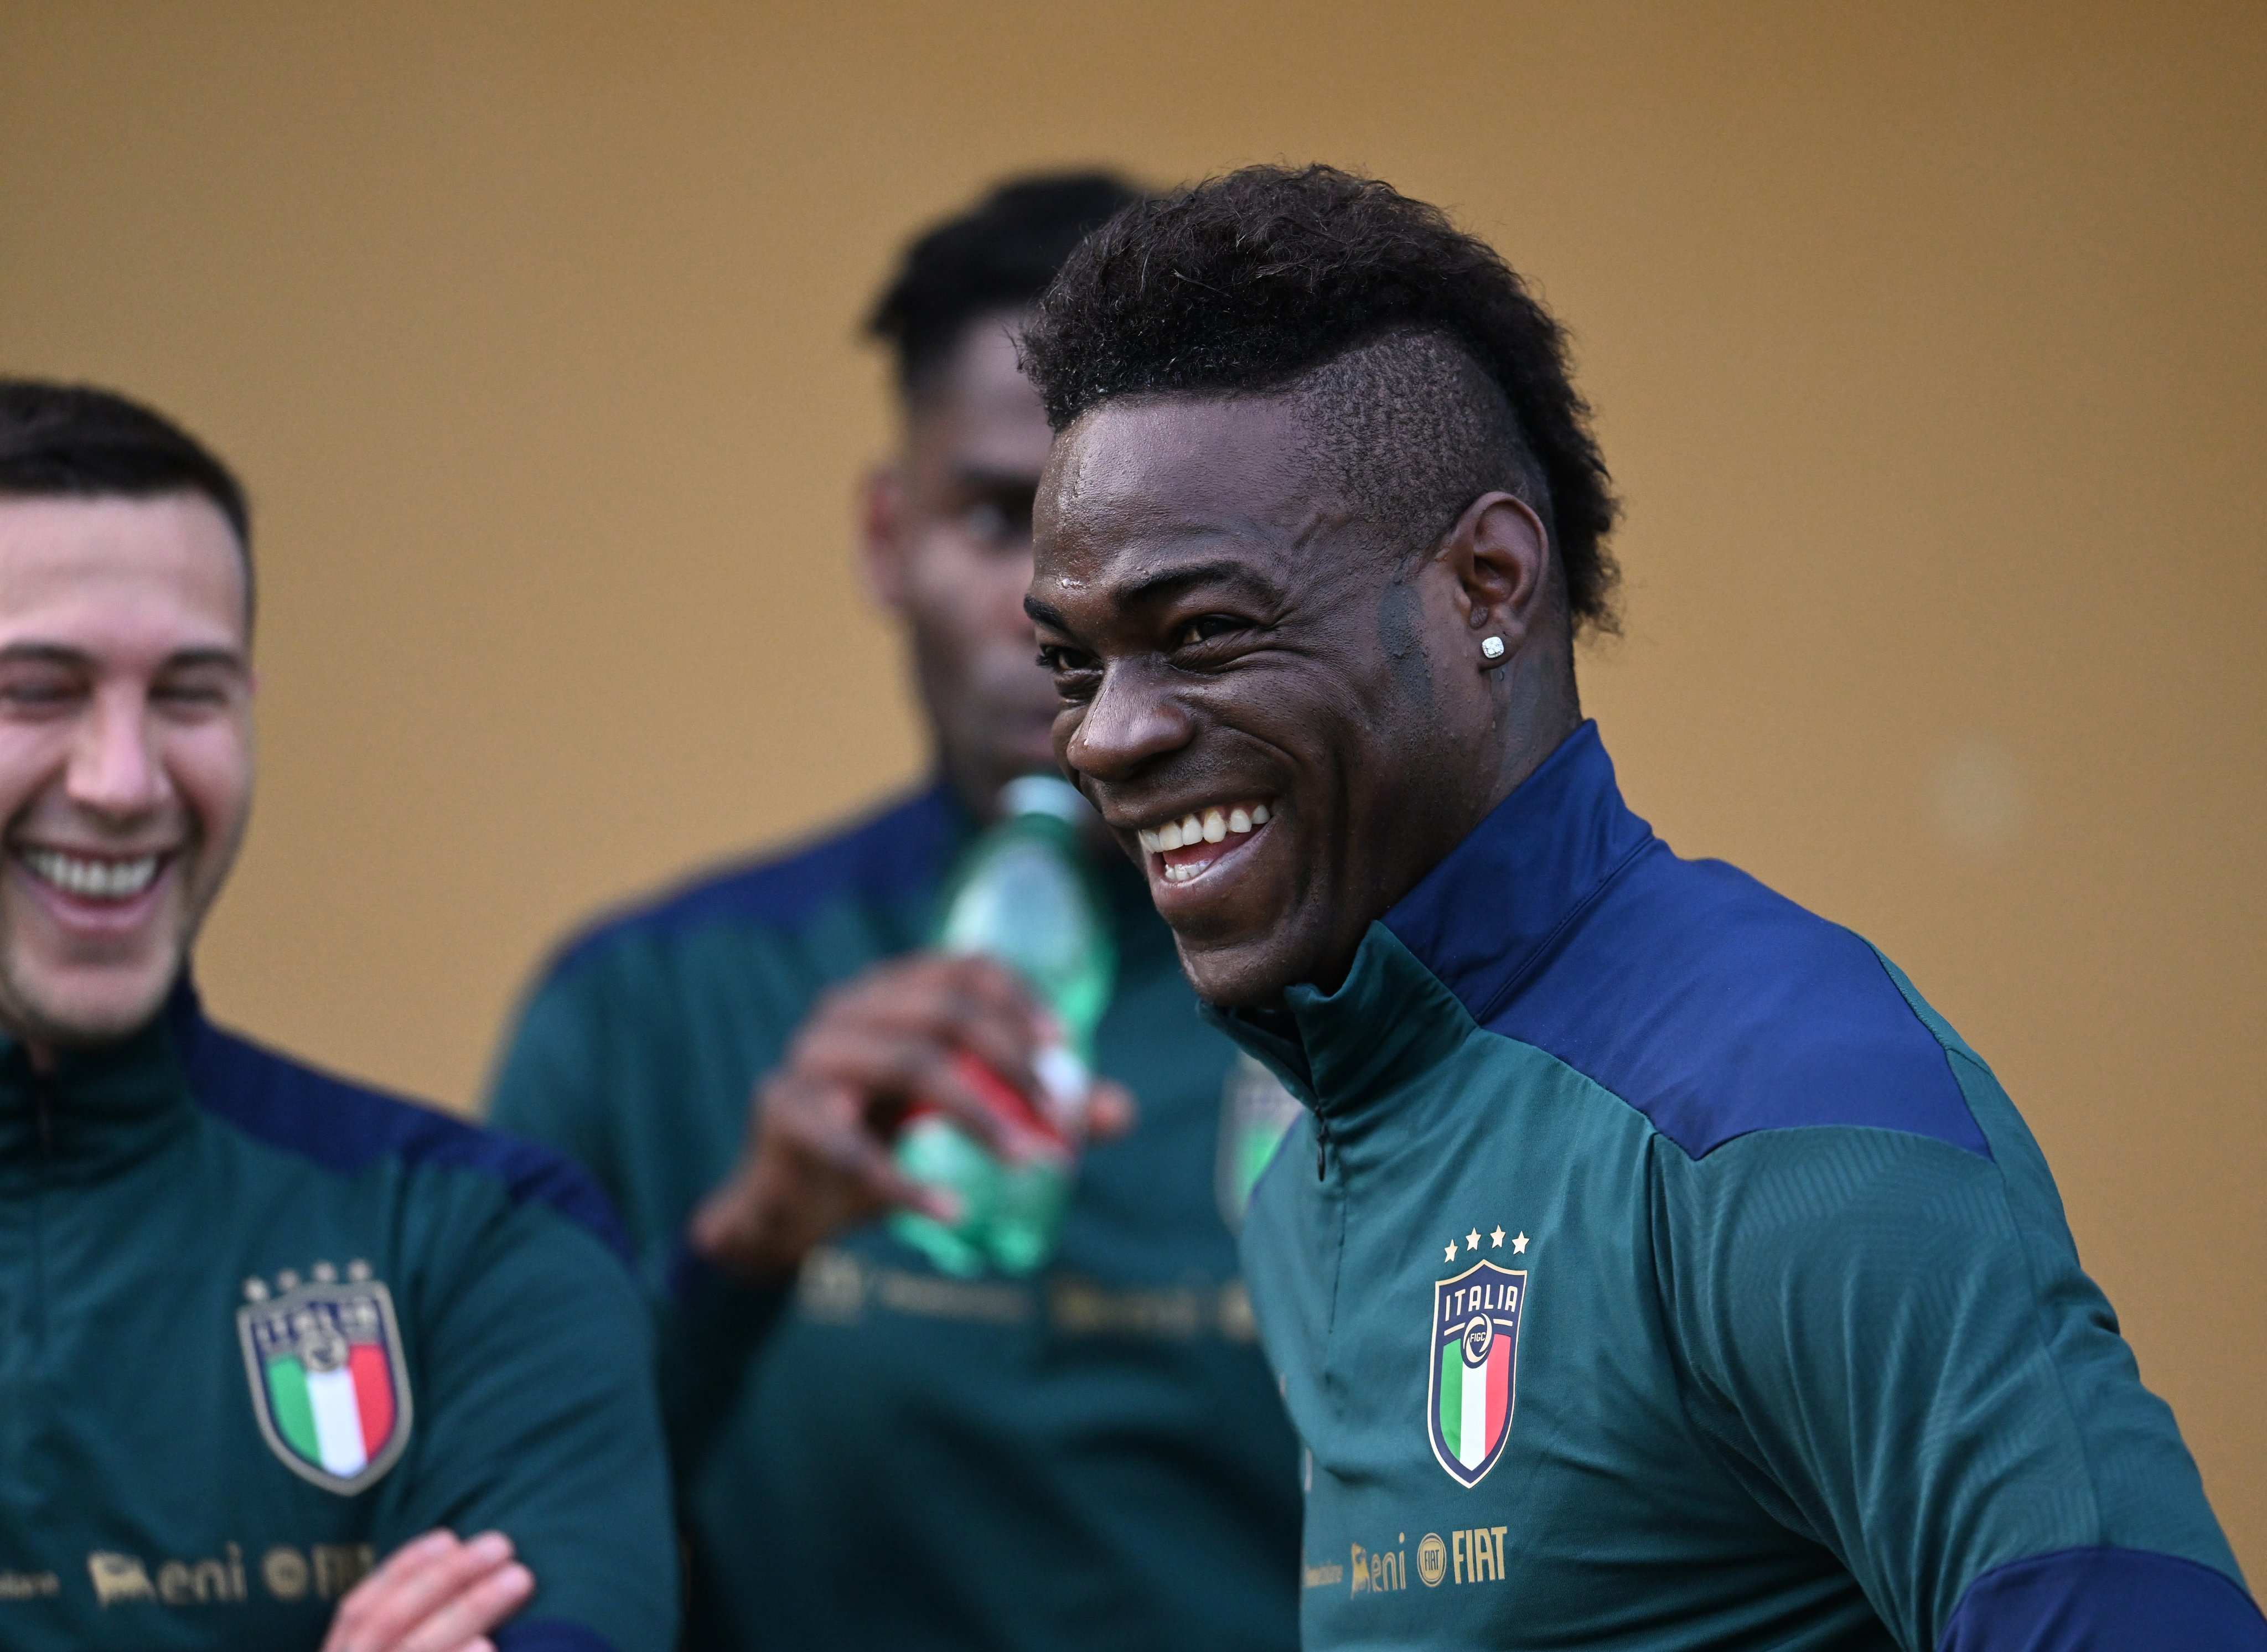 I'm pretty good in front of goal and there were opportunities to score, claims Mario Balotelli